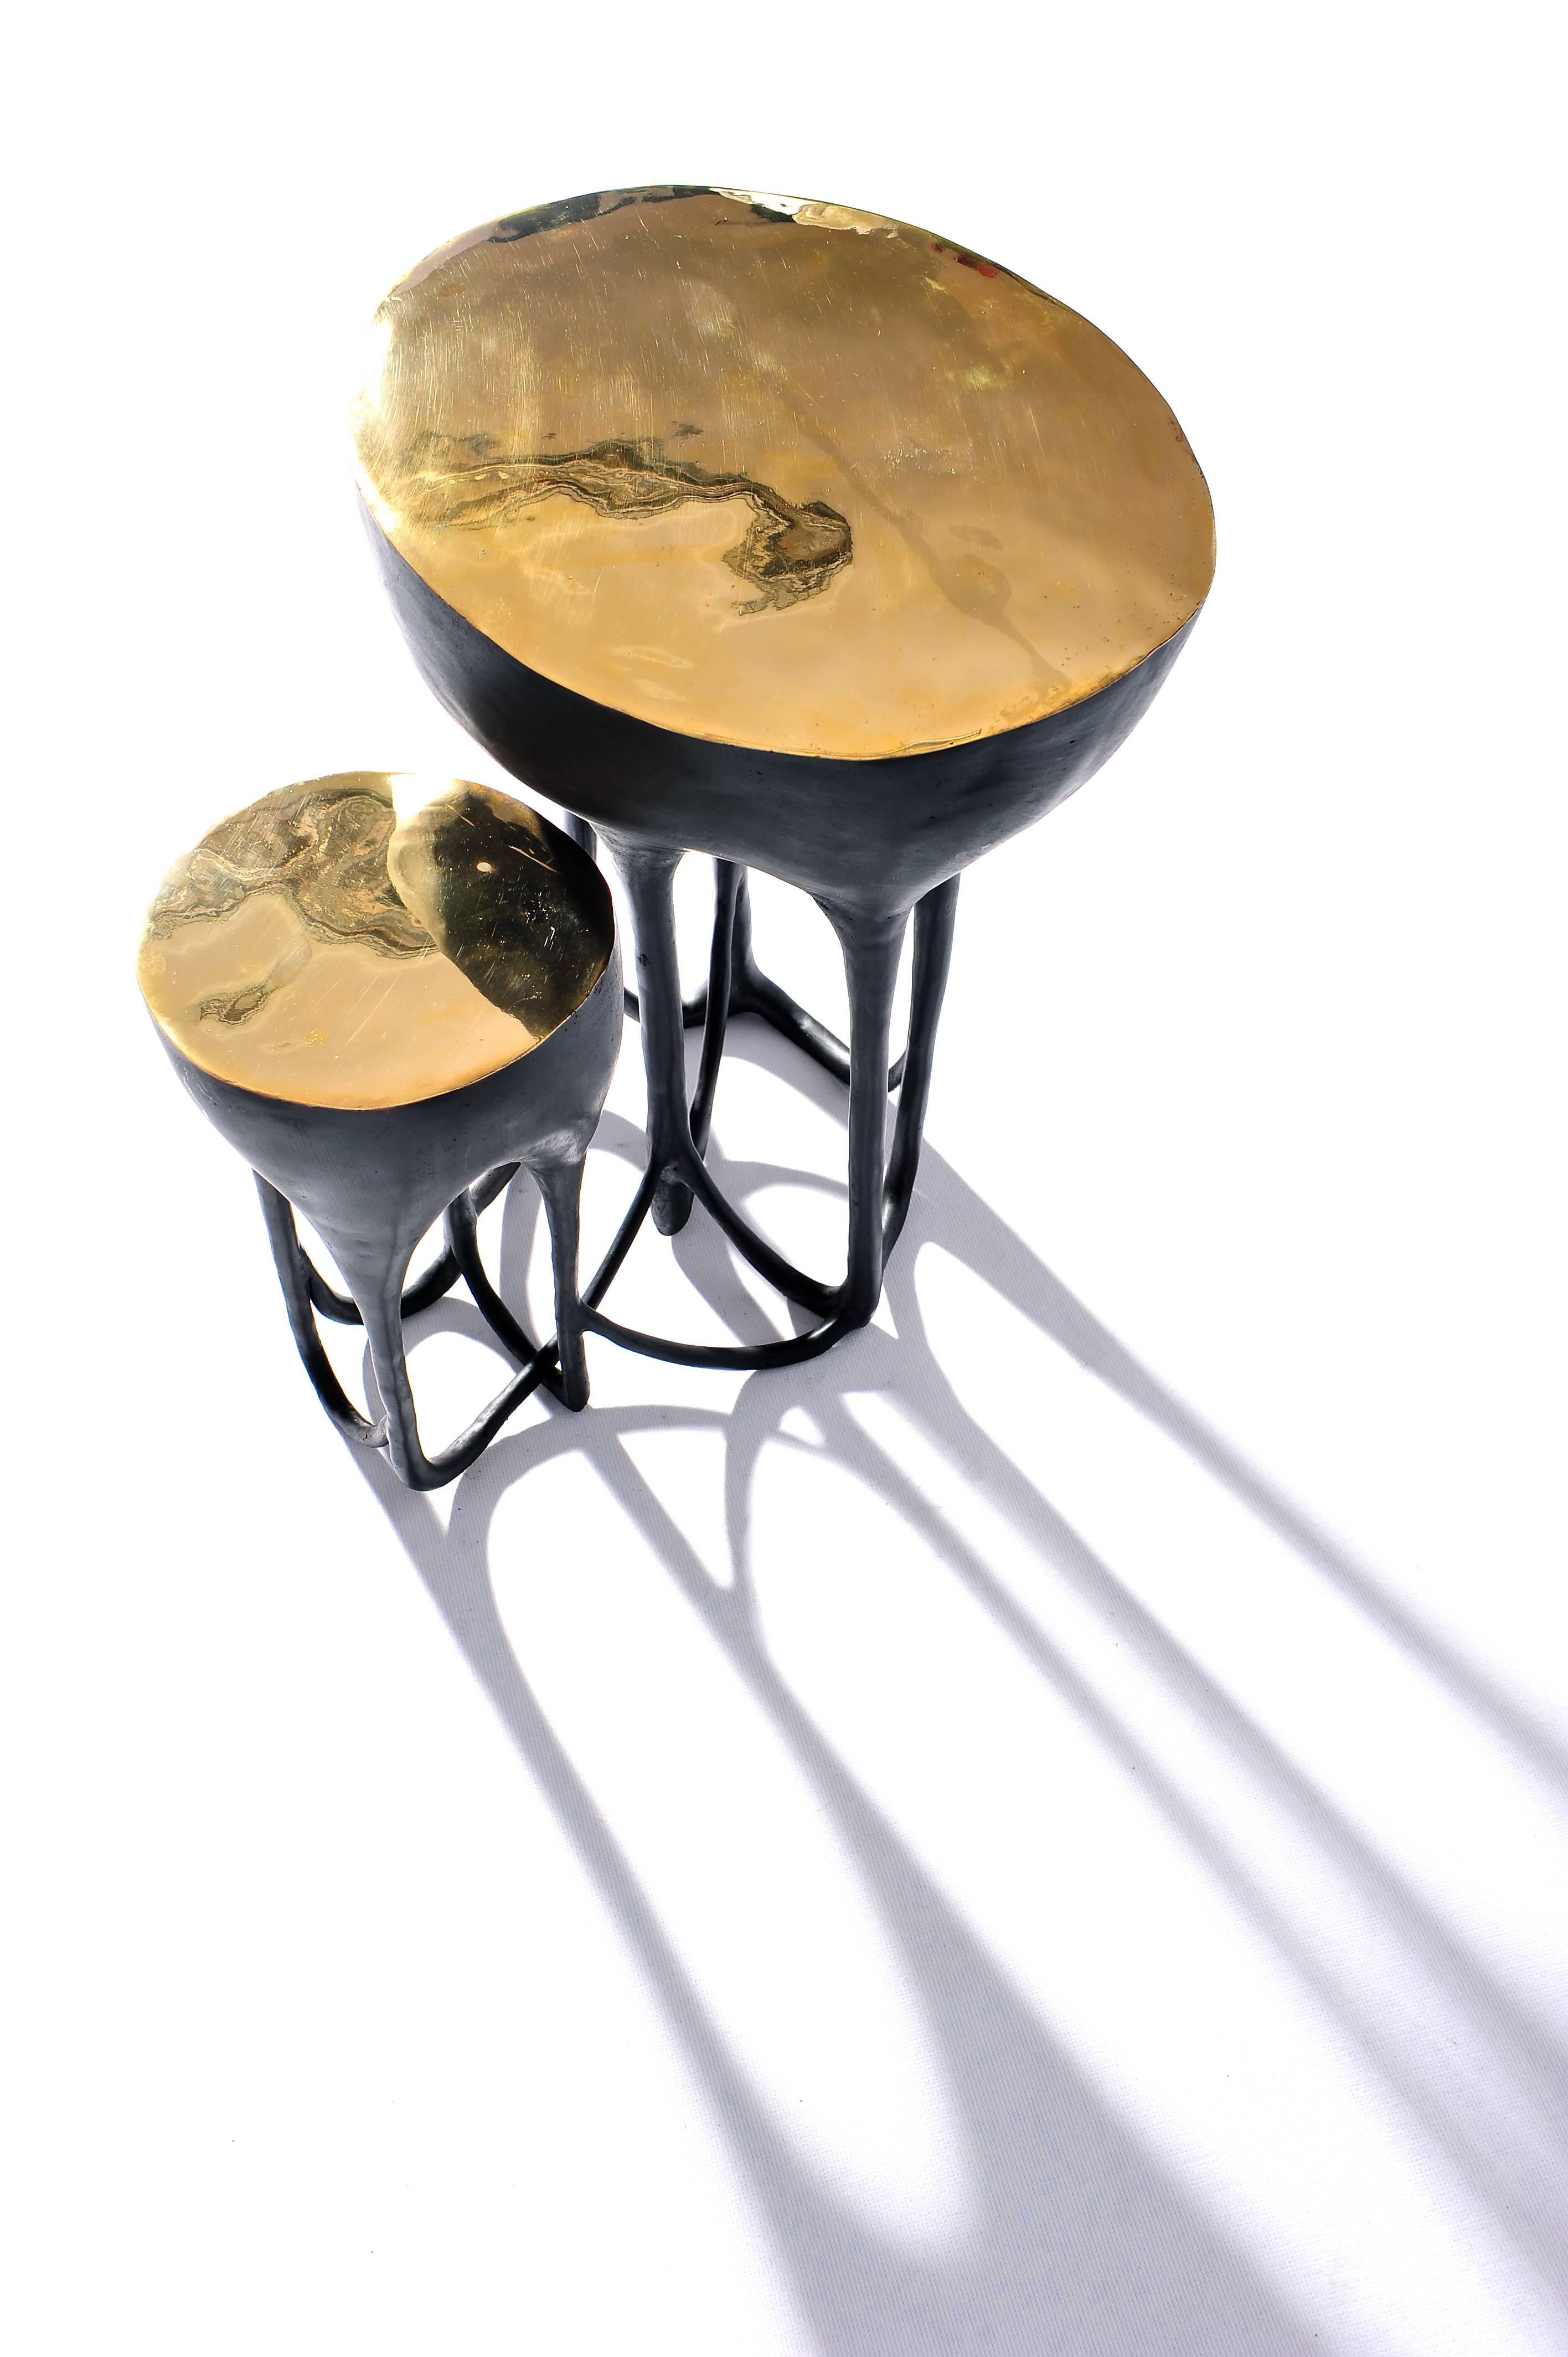 Brass Hand-Sculpted Side Table by Misaya
Brass hand-sculpted side table 
Dimensions: H 50 x W 43 x L 50 cm.